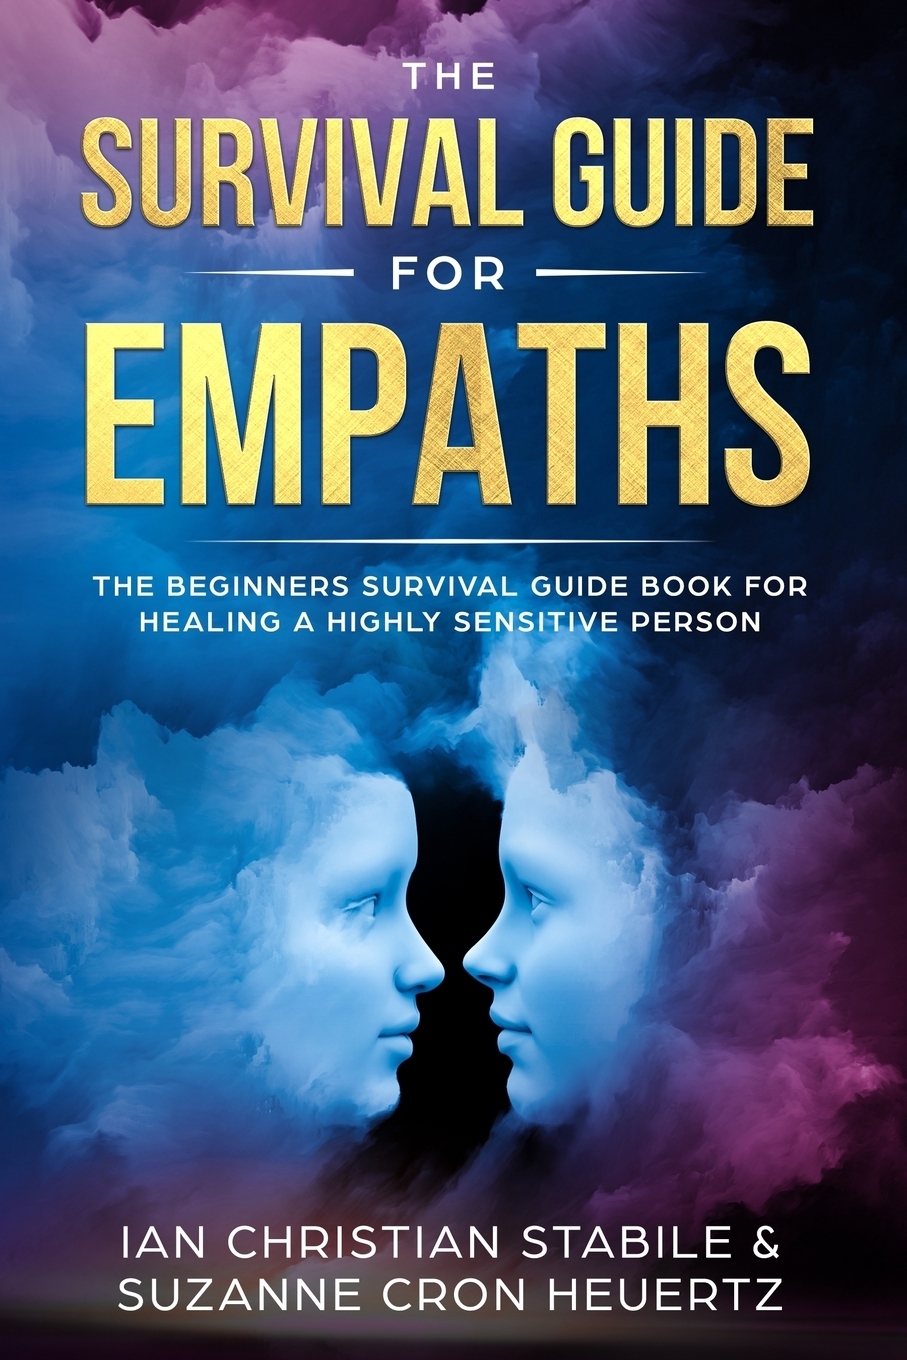 The Survival Guide for Empaths. The Beginners Survival Guide Book for Healing a Highly Sensitive Person